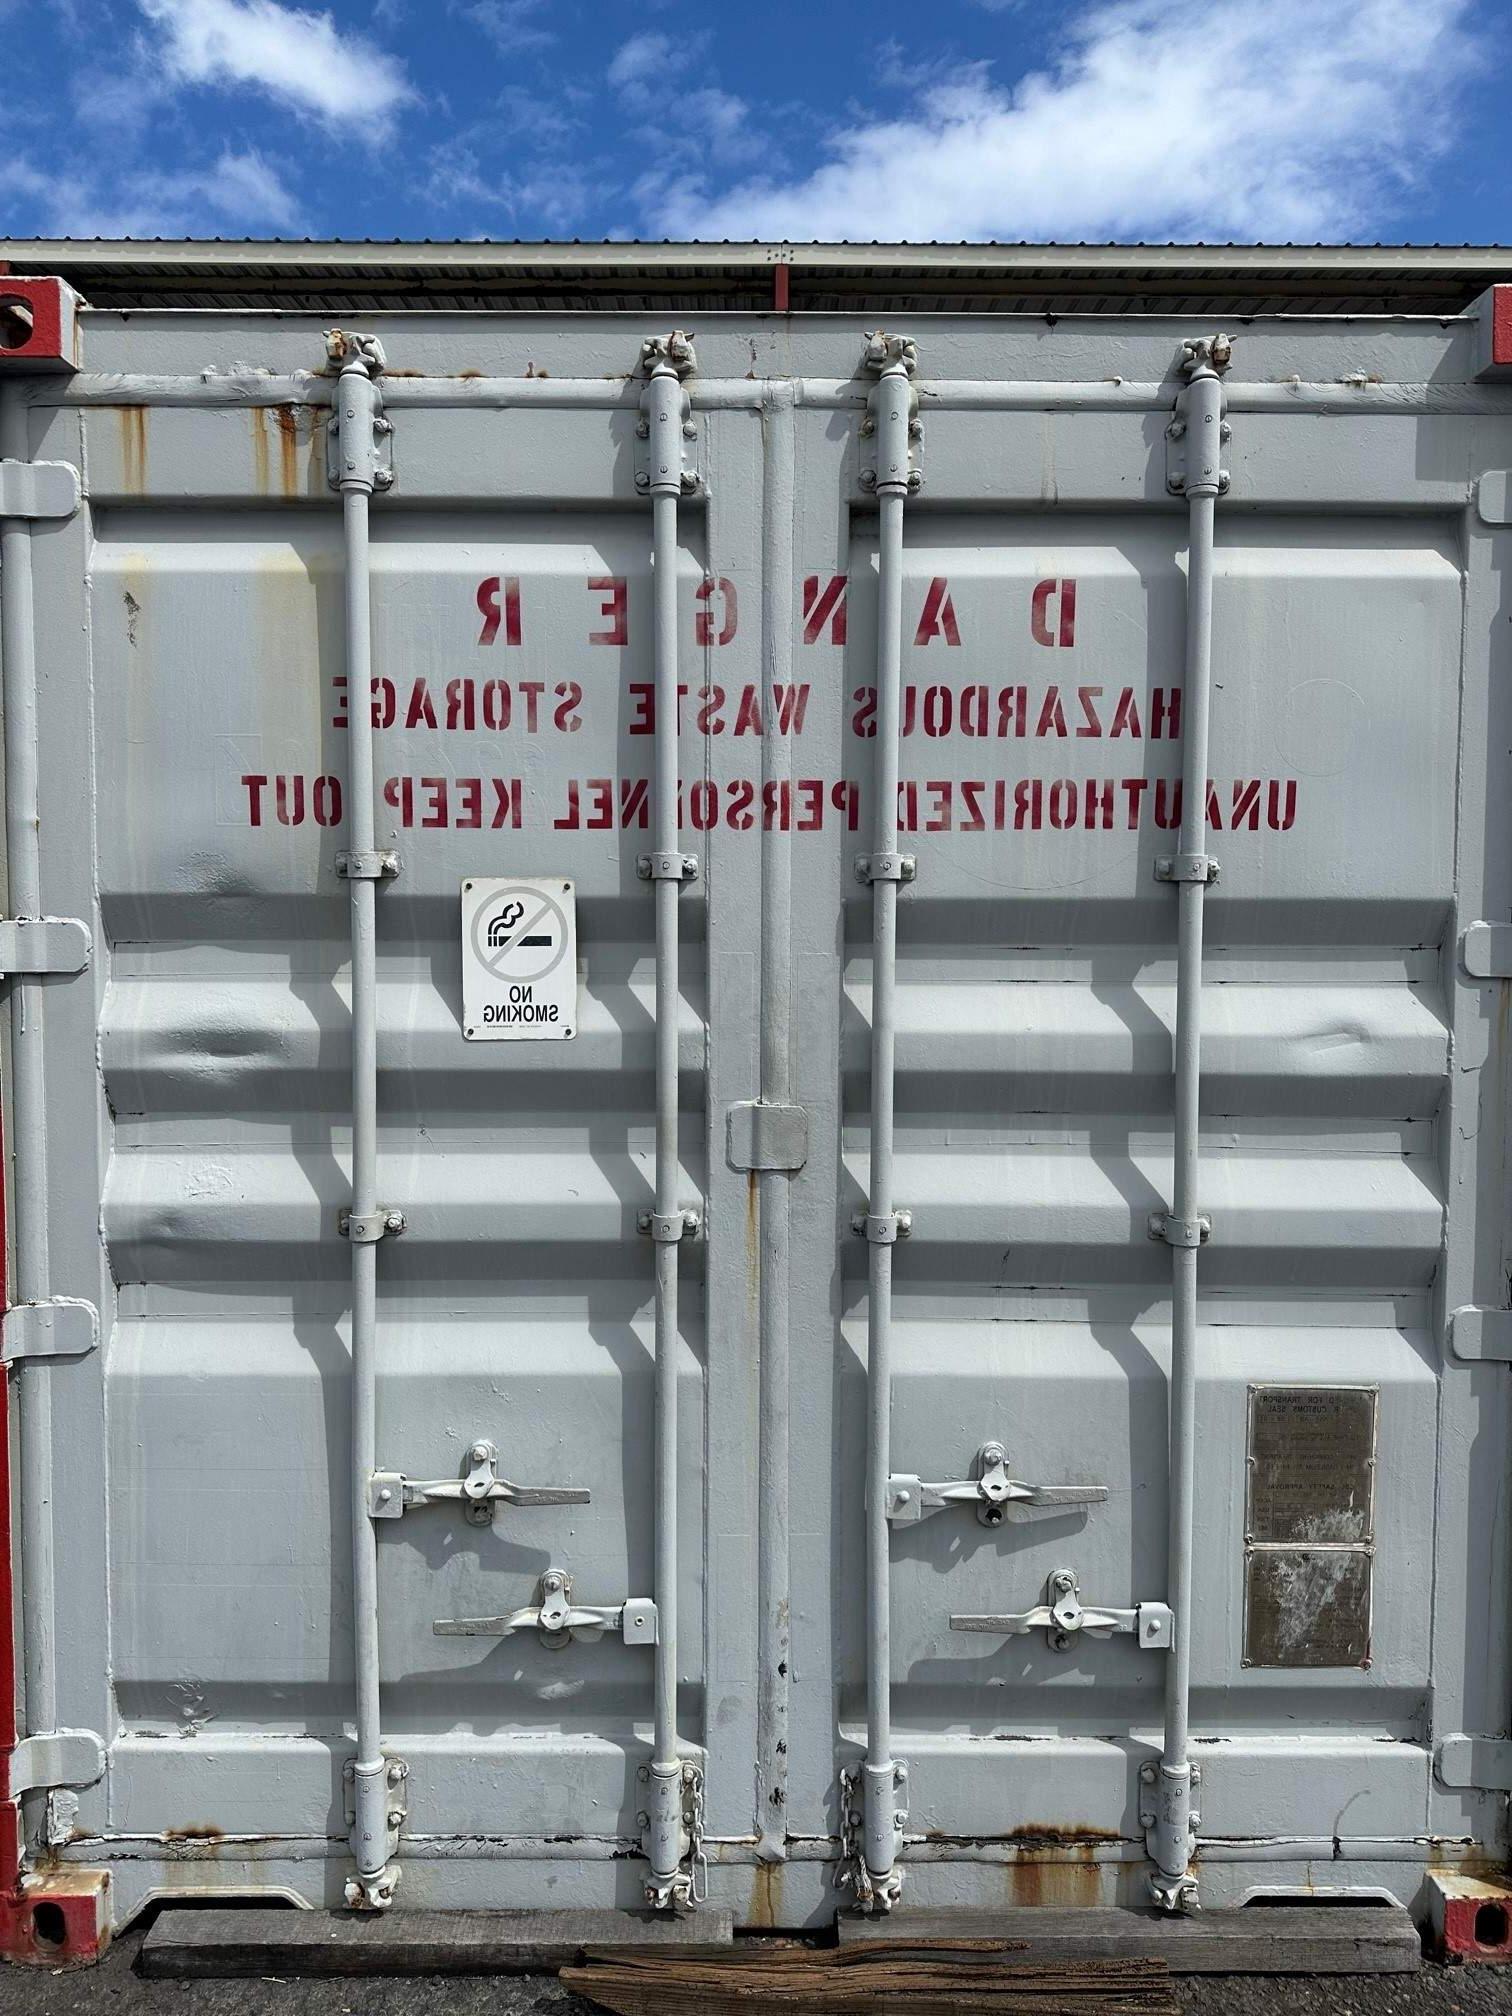 Gray container marked "DANGER Hazardous Waste Storage Unauthorized Personnel Keep Out" in red sits at a terminal.